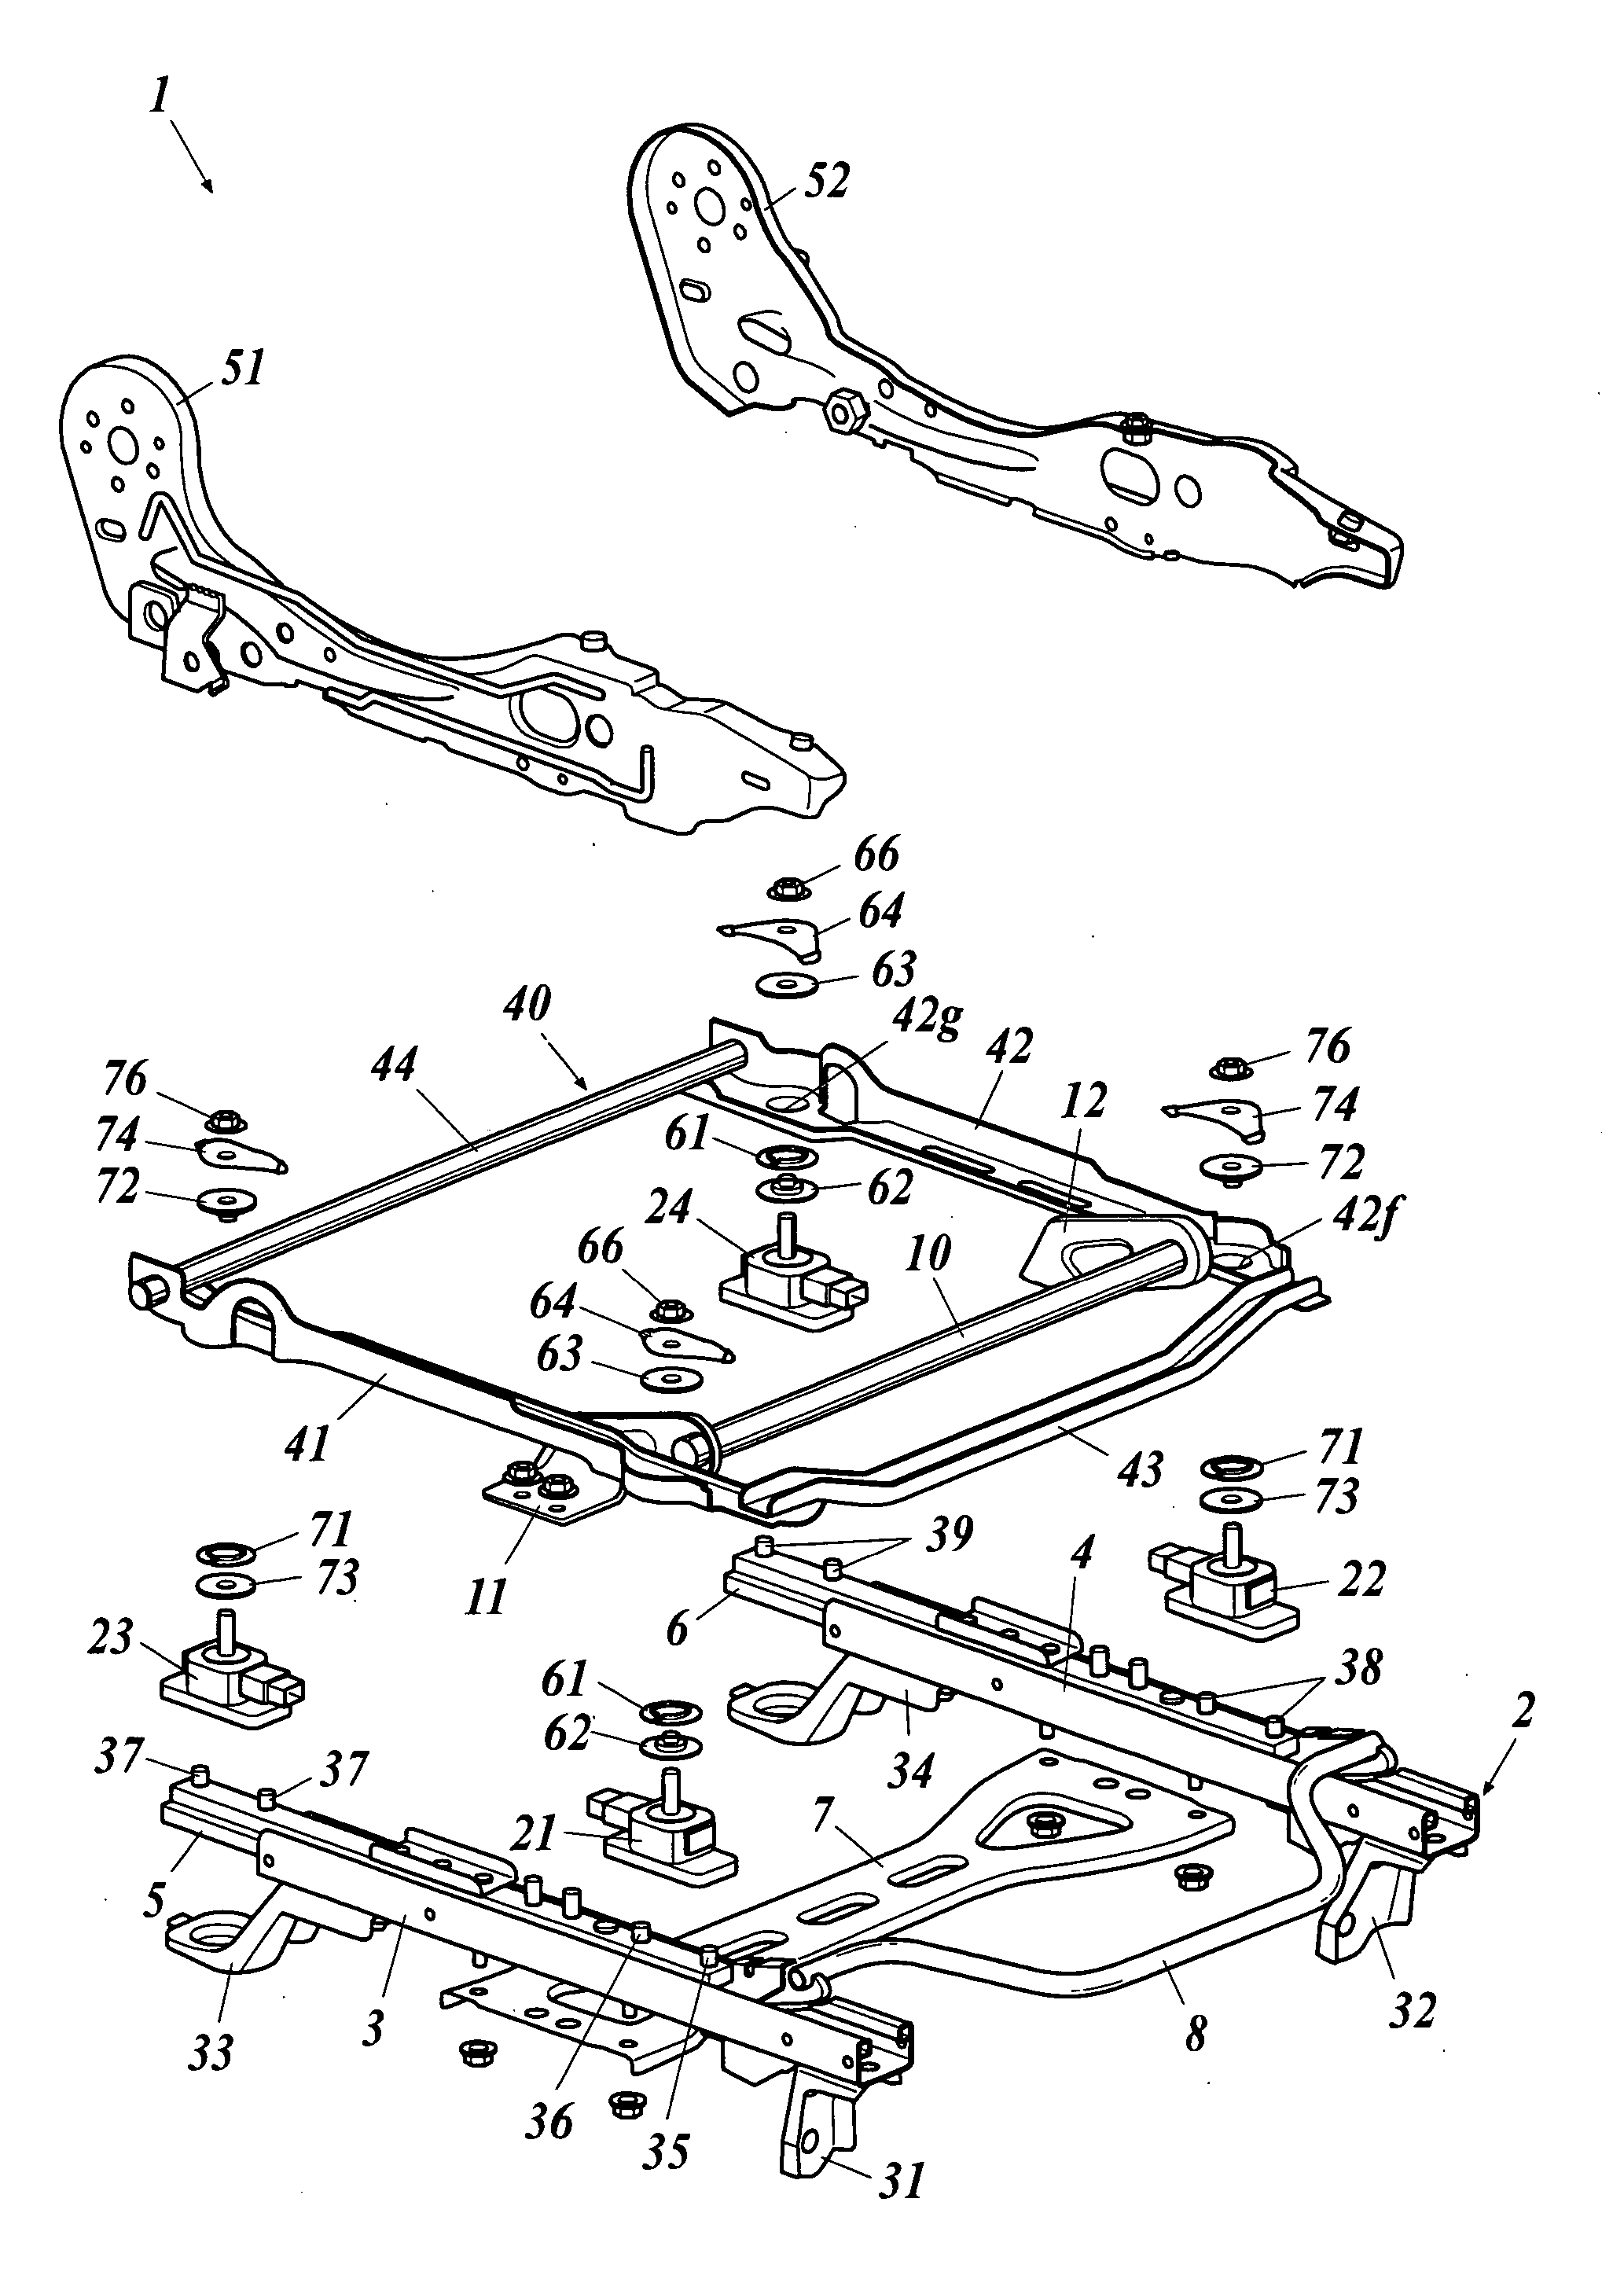 Passenger's weight measurement device for vehicle seat and attachment structure for load sensor